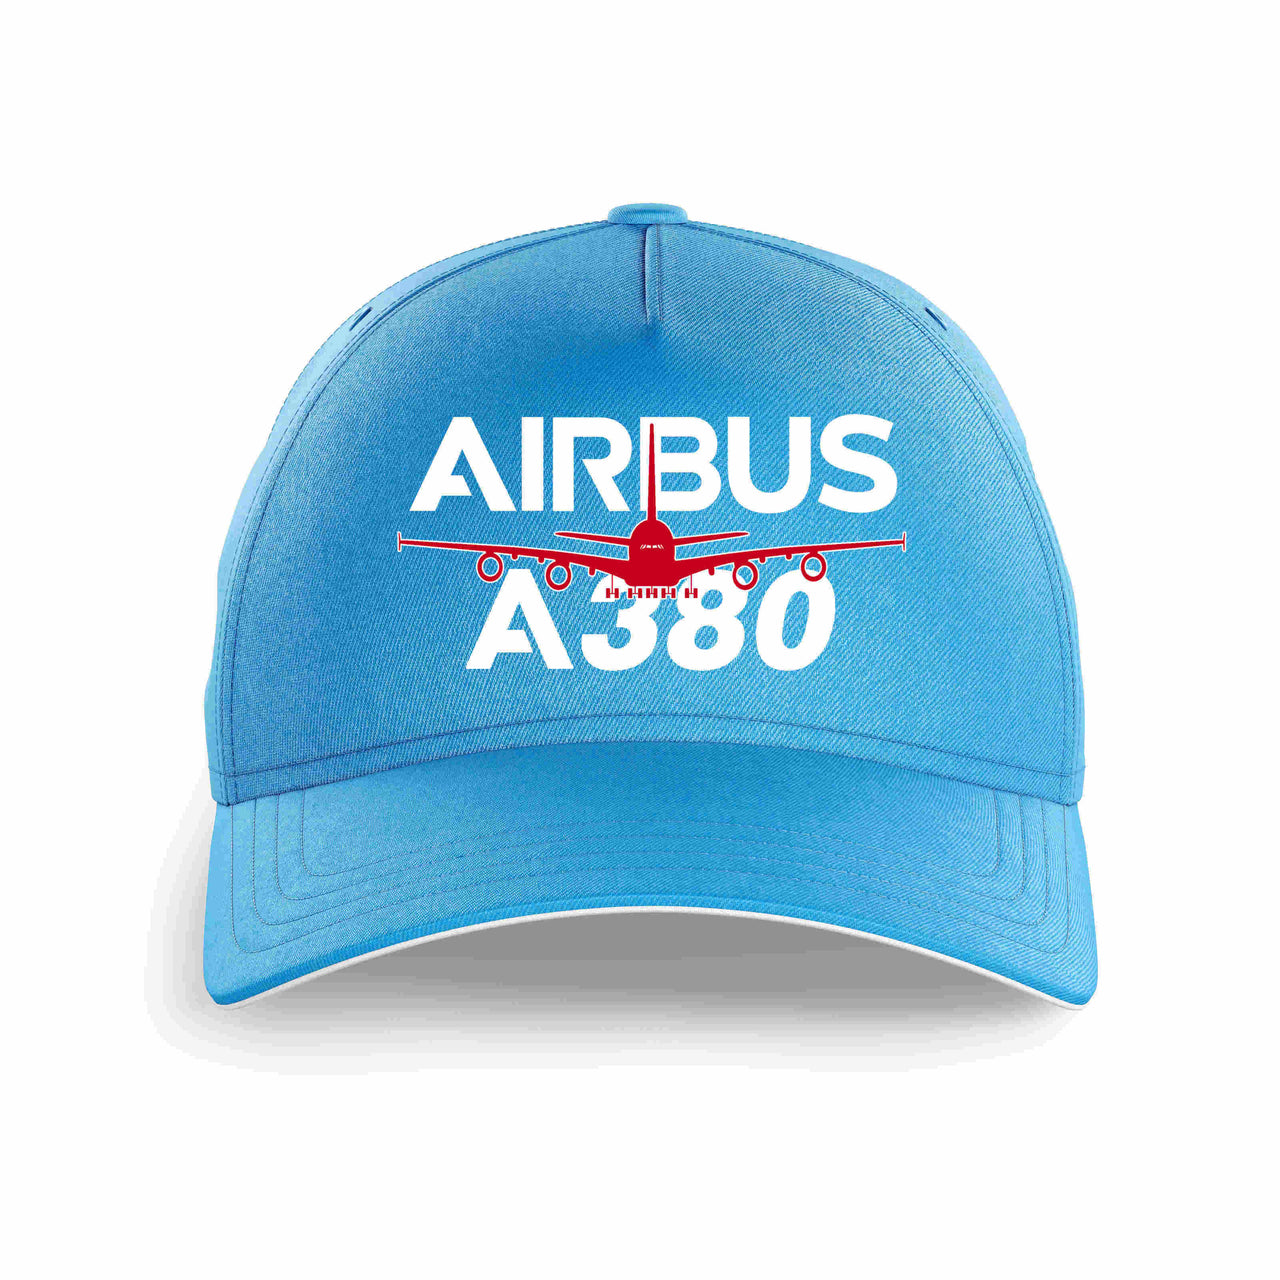 Amazing Airbus A380 Printed Hats